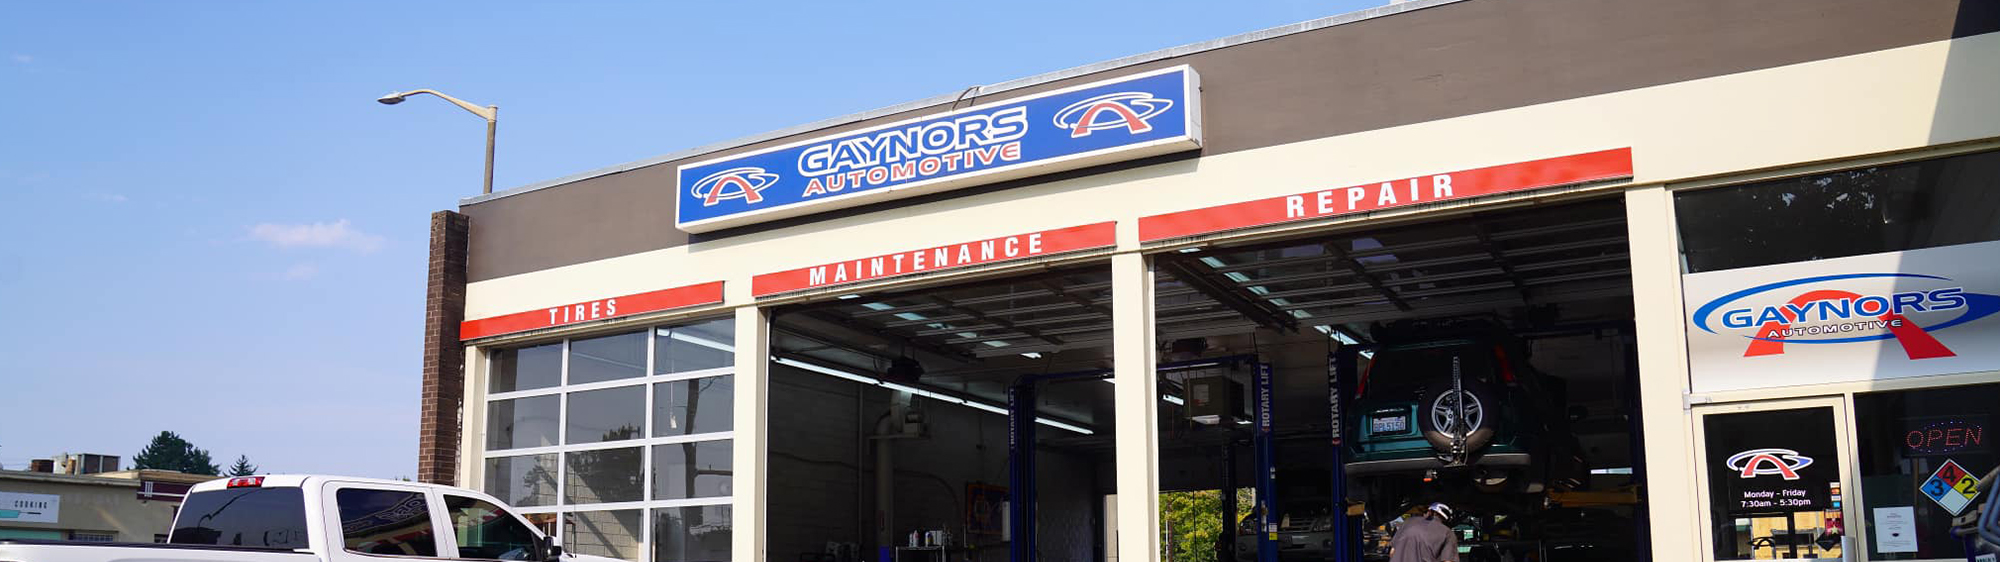 Auto Repair Services | Downtown, WA - Gaynors Automotive